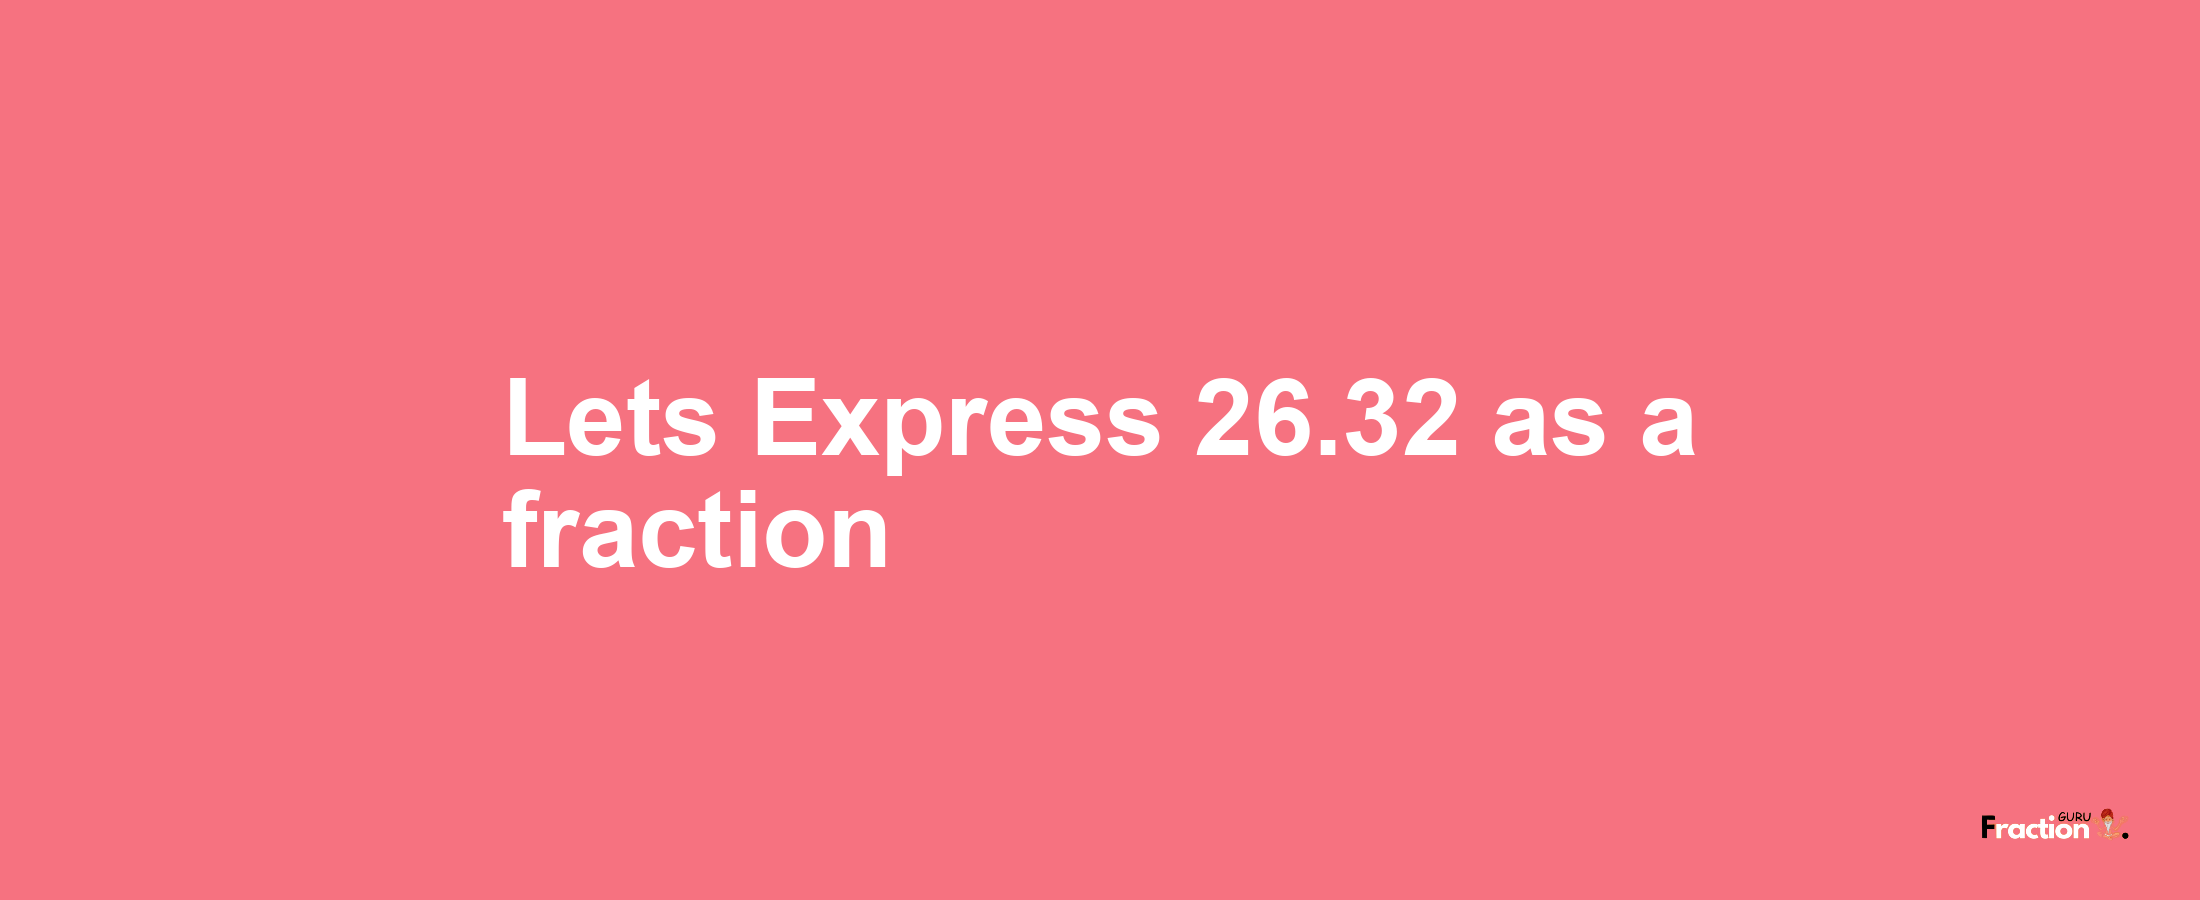 Lets Express 26.32 as afraction